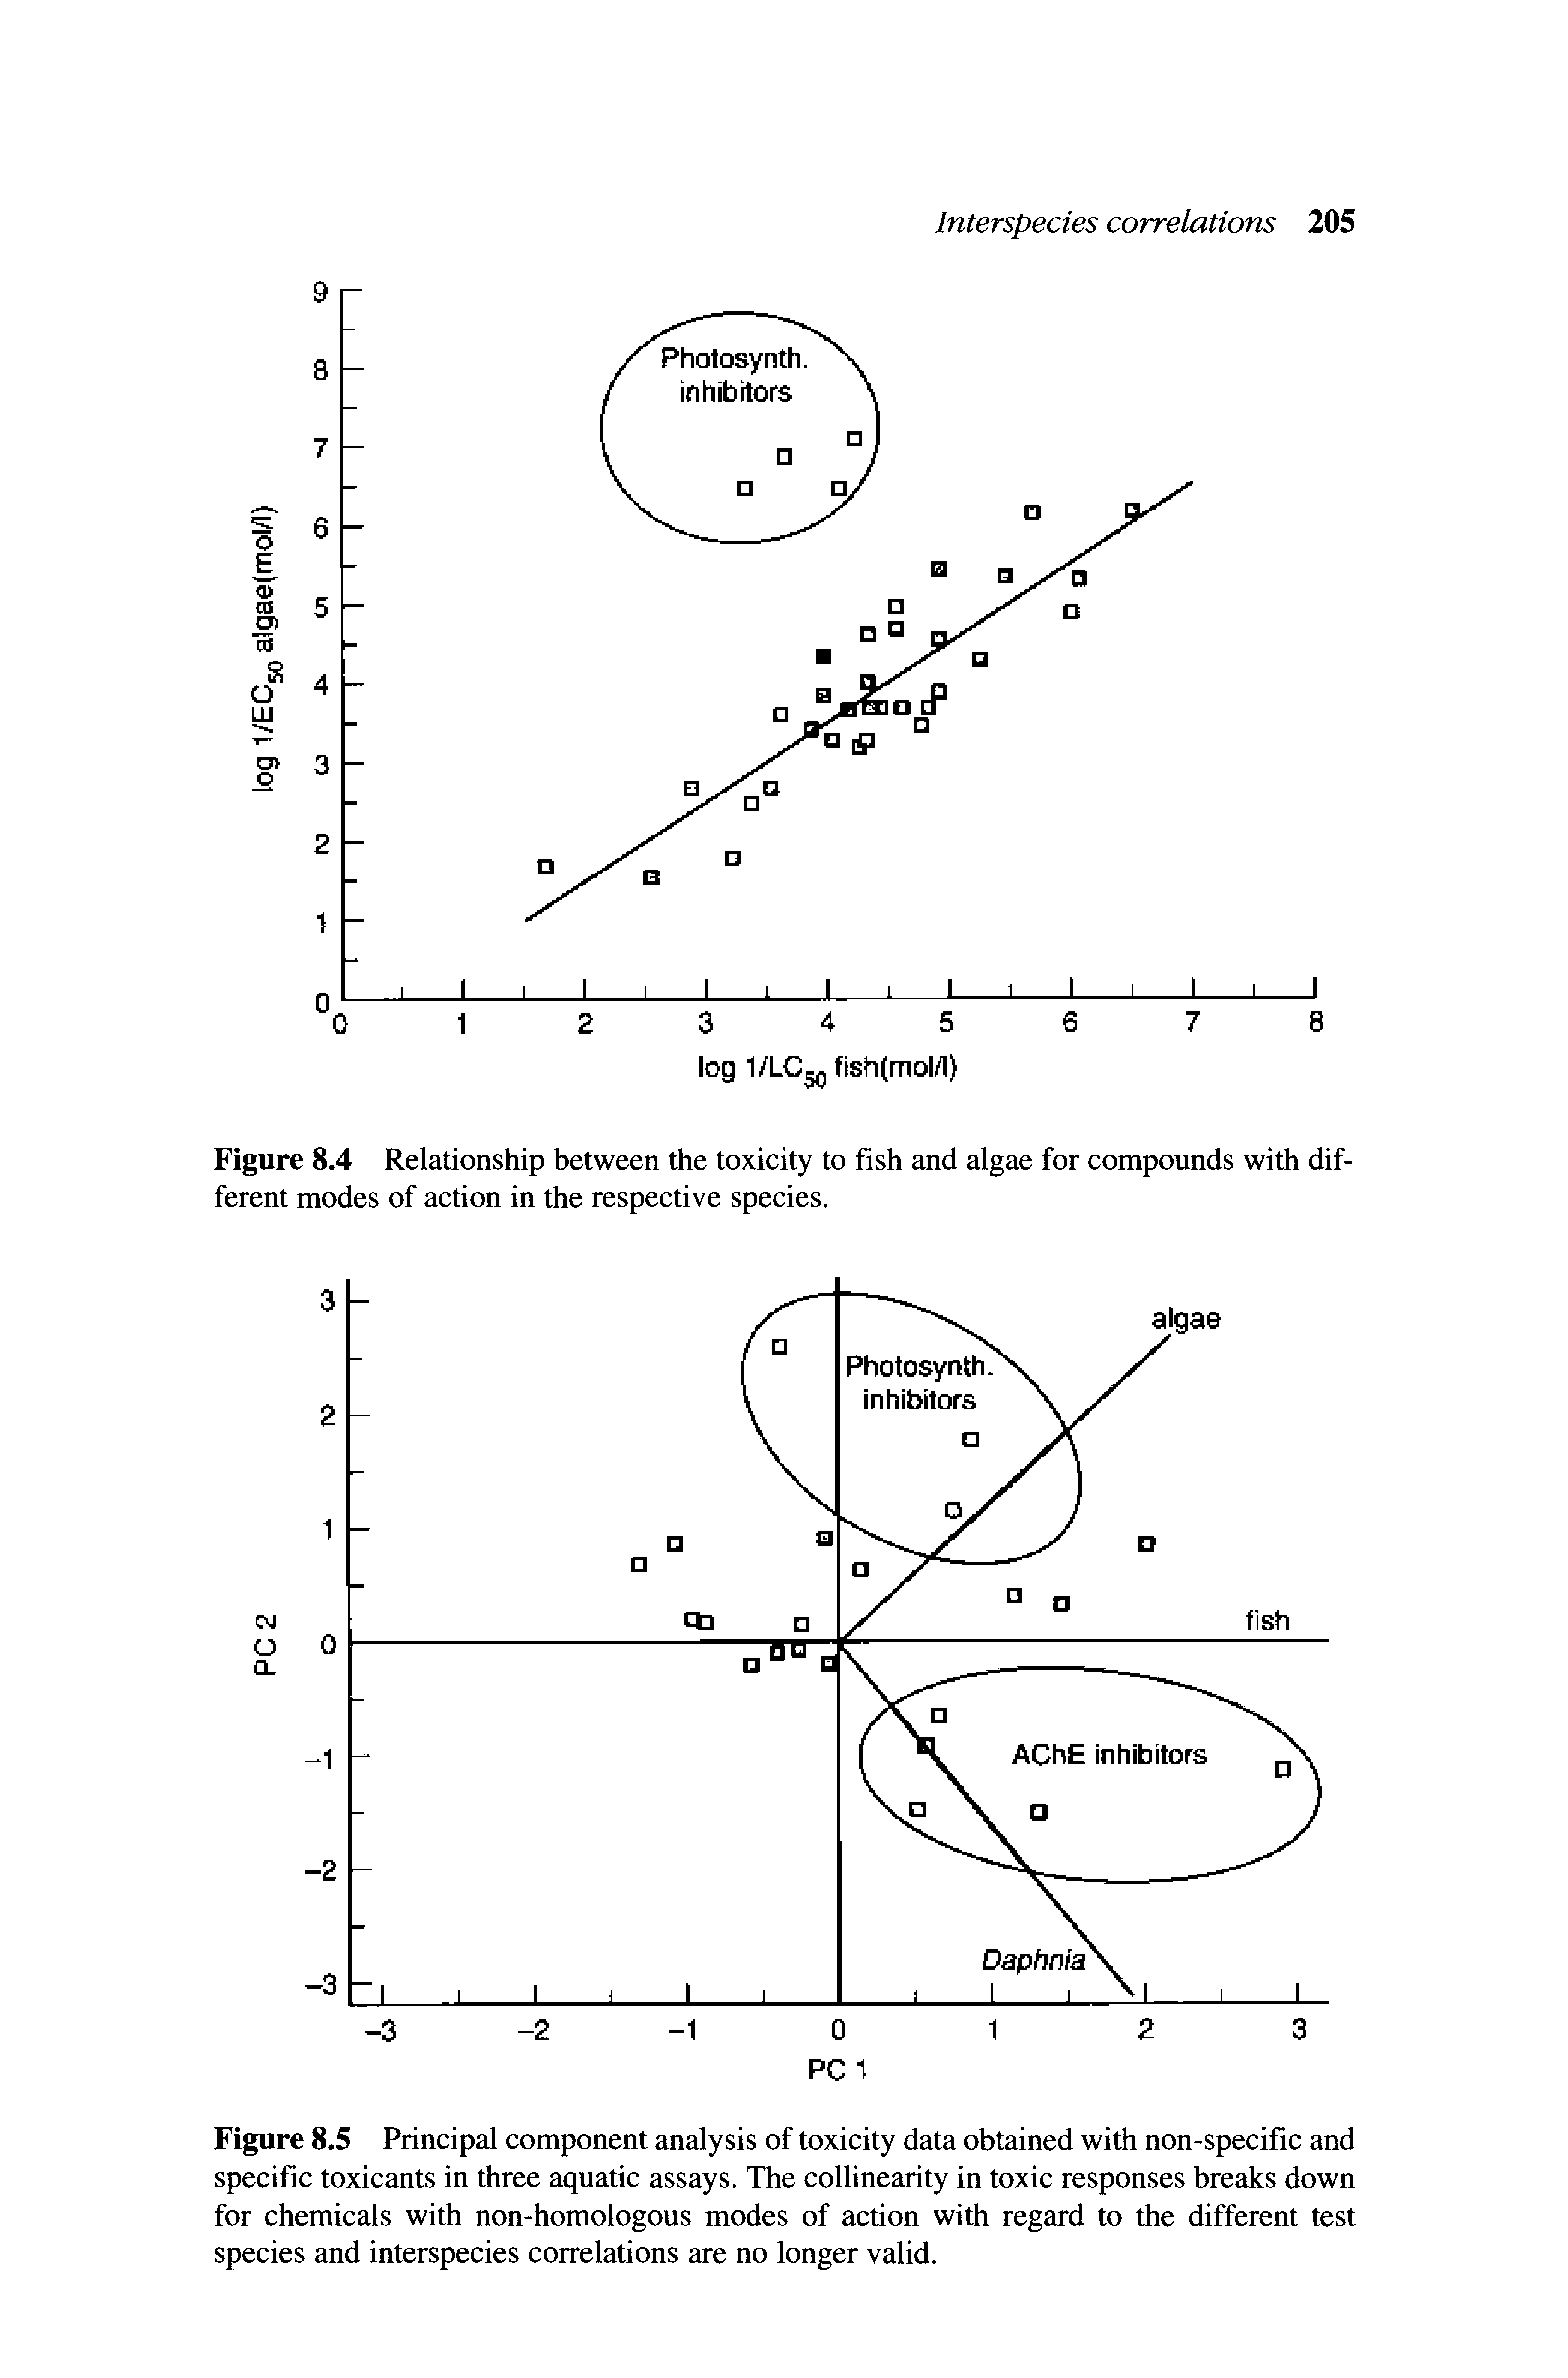 Figure 8.5 Principal component analysis of toxicity data obtained with non-specific and specific toxicants in three aquatic assays. The collinearity in toxic responses breaks down for chemicals with non-homologous modes of action with regard to the different test species and interspecies correlations are no longer valid.